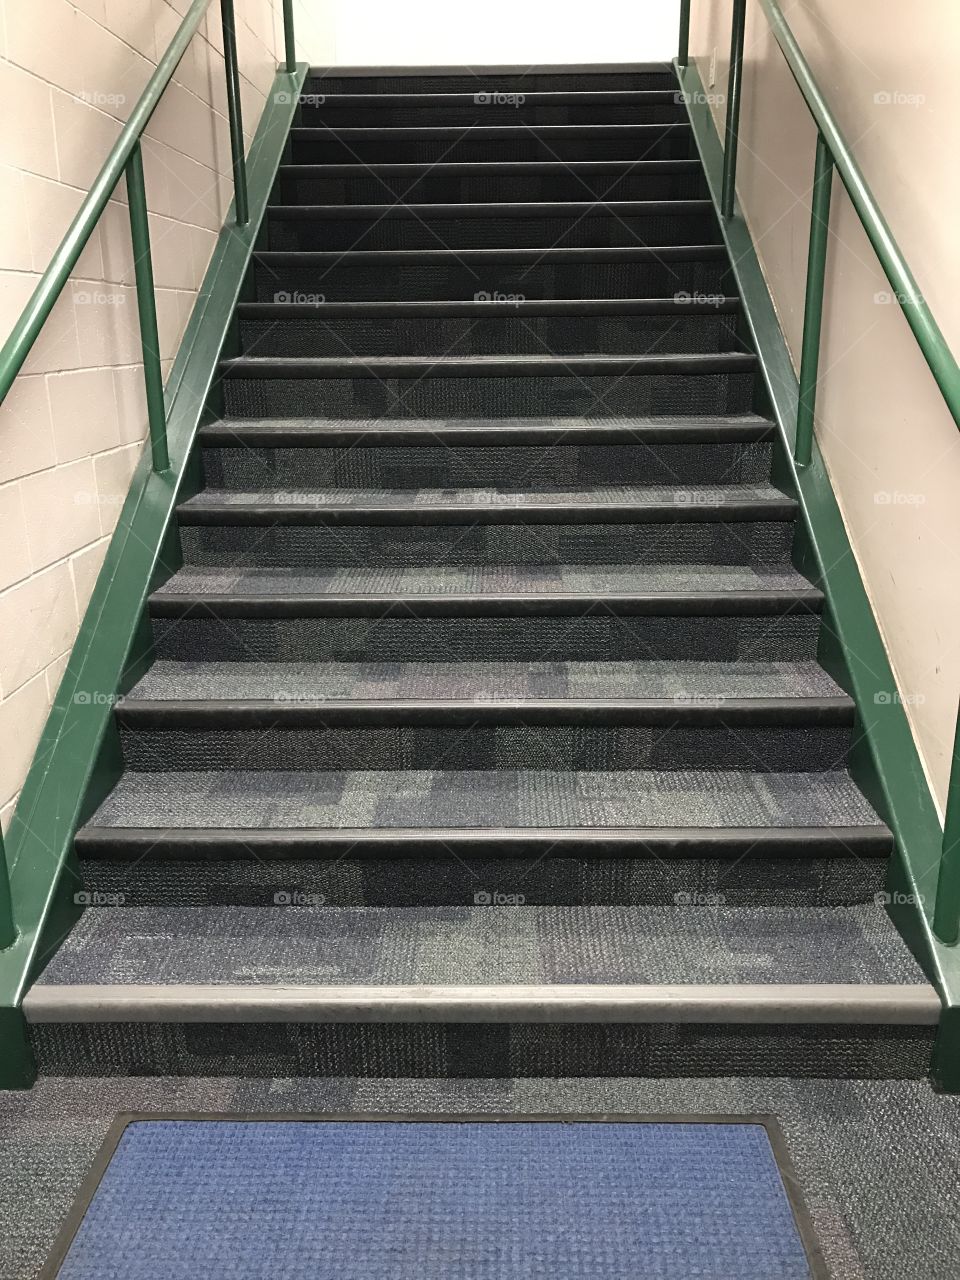 Patterned stairs 